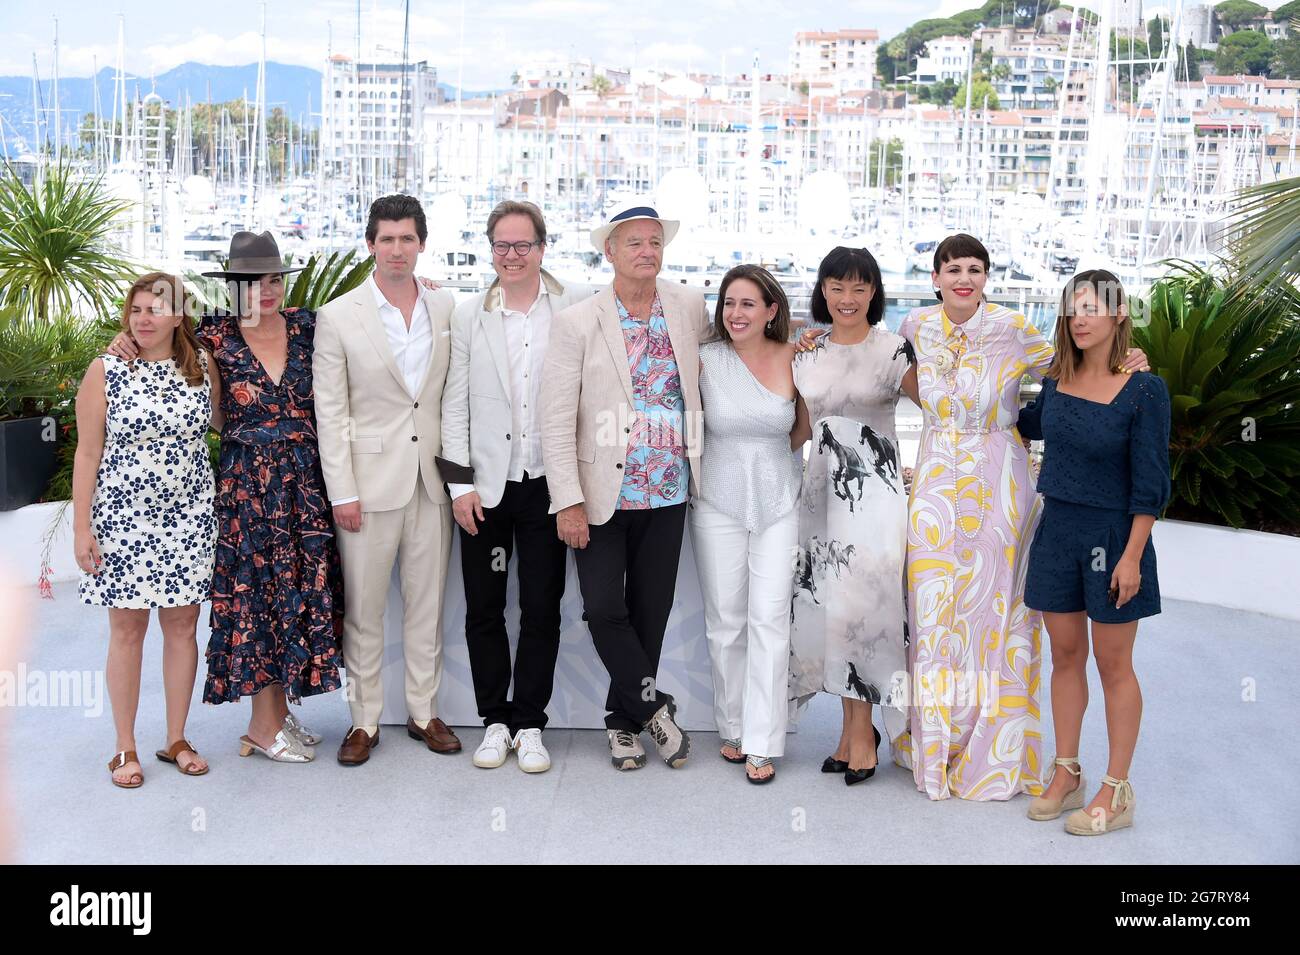 Cannes, France. 16th July, 2021. 74th Cannes Film Festival 2021, Photocall film : New Worlds: The Cradle Of Civilization - Pictured: Bill Murray, Andrew Muscato, Amanda Livanou, Karen Duffy, Jan Vogler, Bill Murray, Vanessa Perez, Mira Wang, Tanja Dorn, Emma Doxiadi Credit: Independent Photo Agency/Alamy Live News Stock Photo